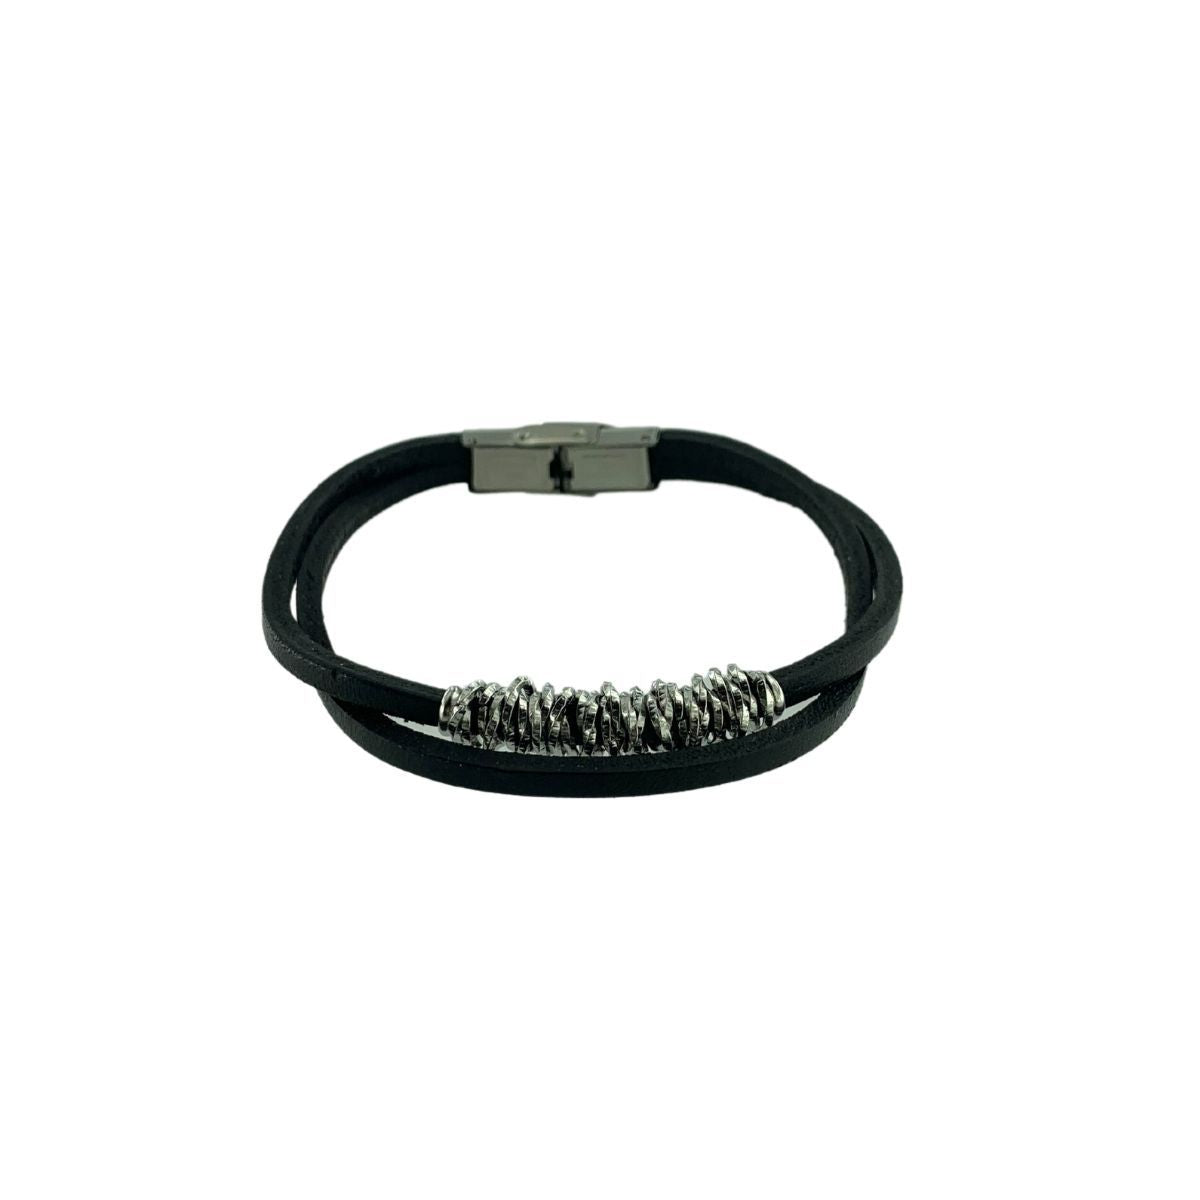 DOUBLE STRIP BLACK LEATHER BRACELET WITH RINGS